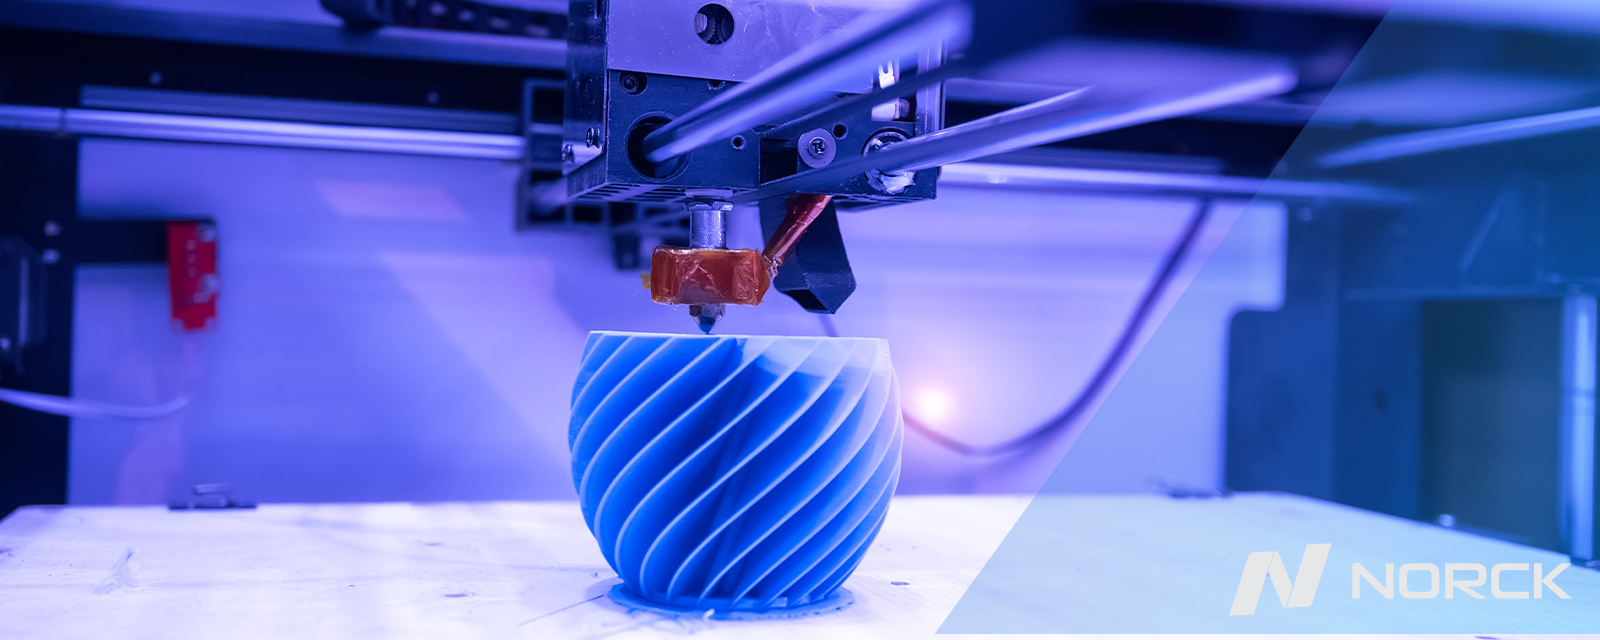 NORCK Launched a New Digital Platform for High Quality 3D Printing